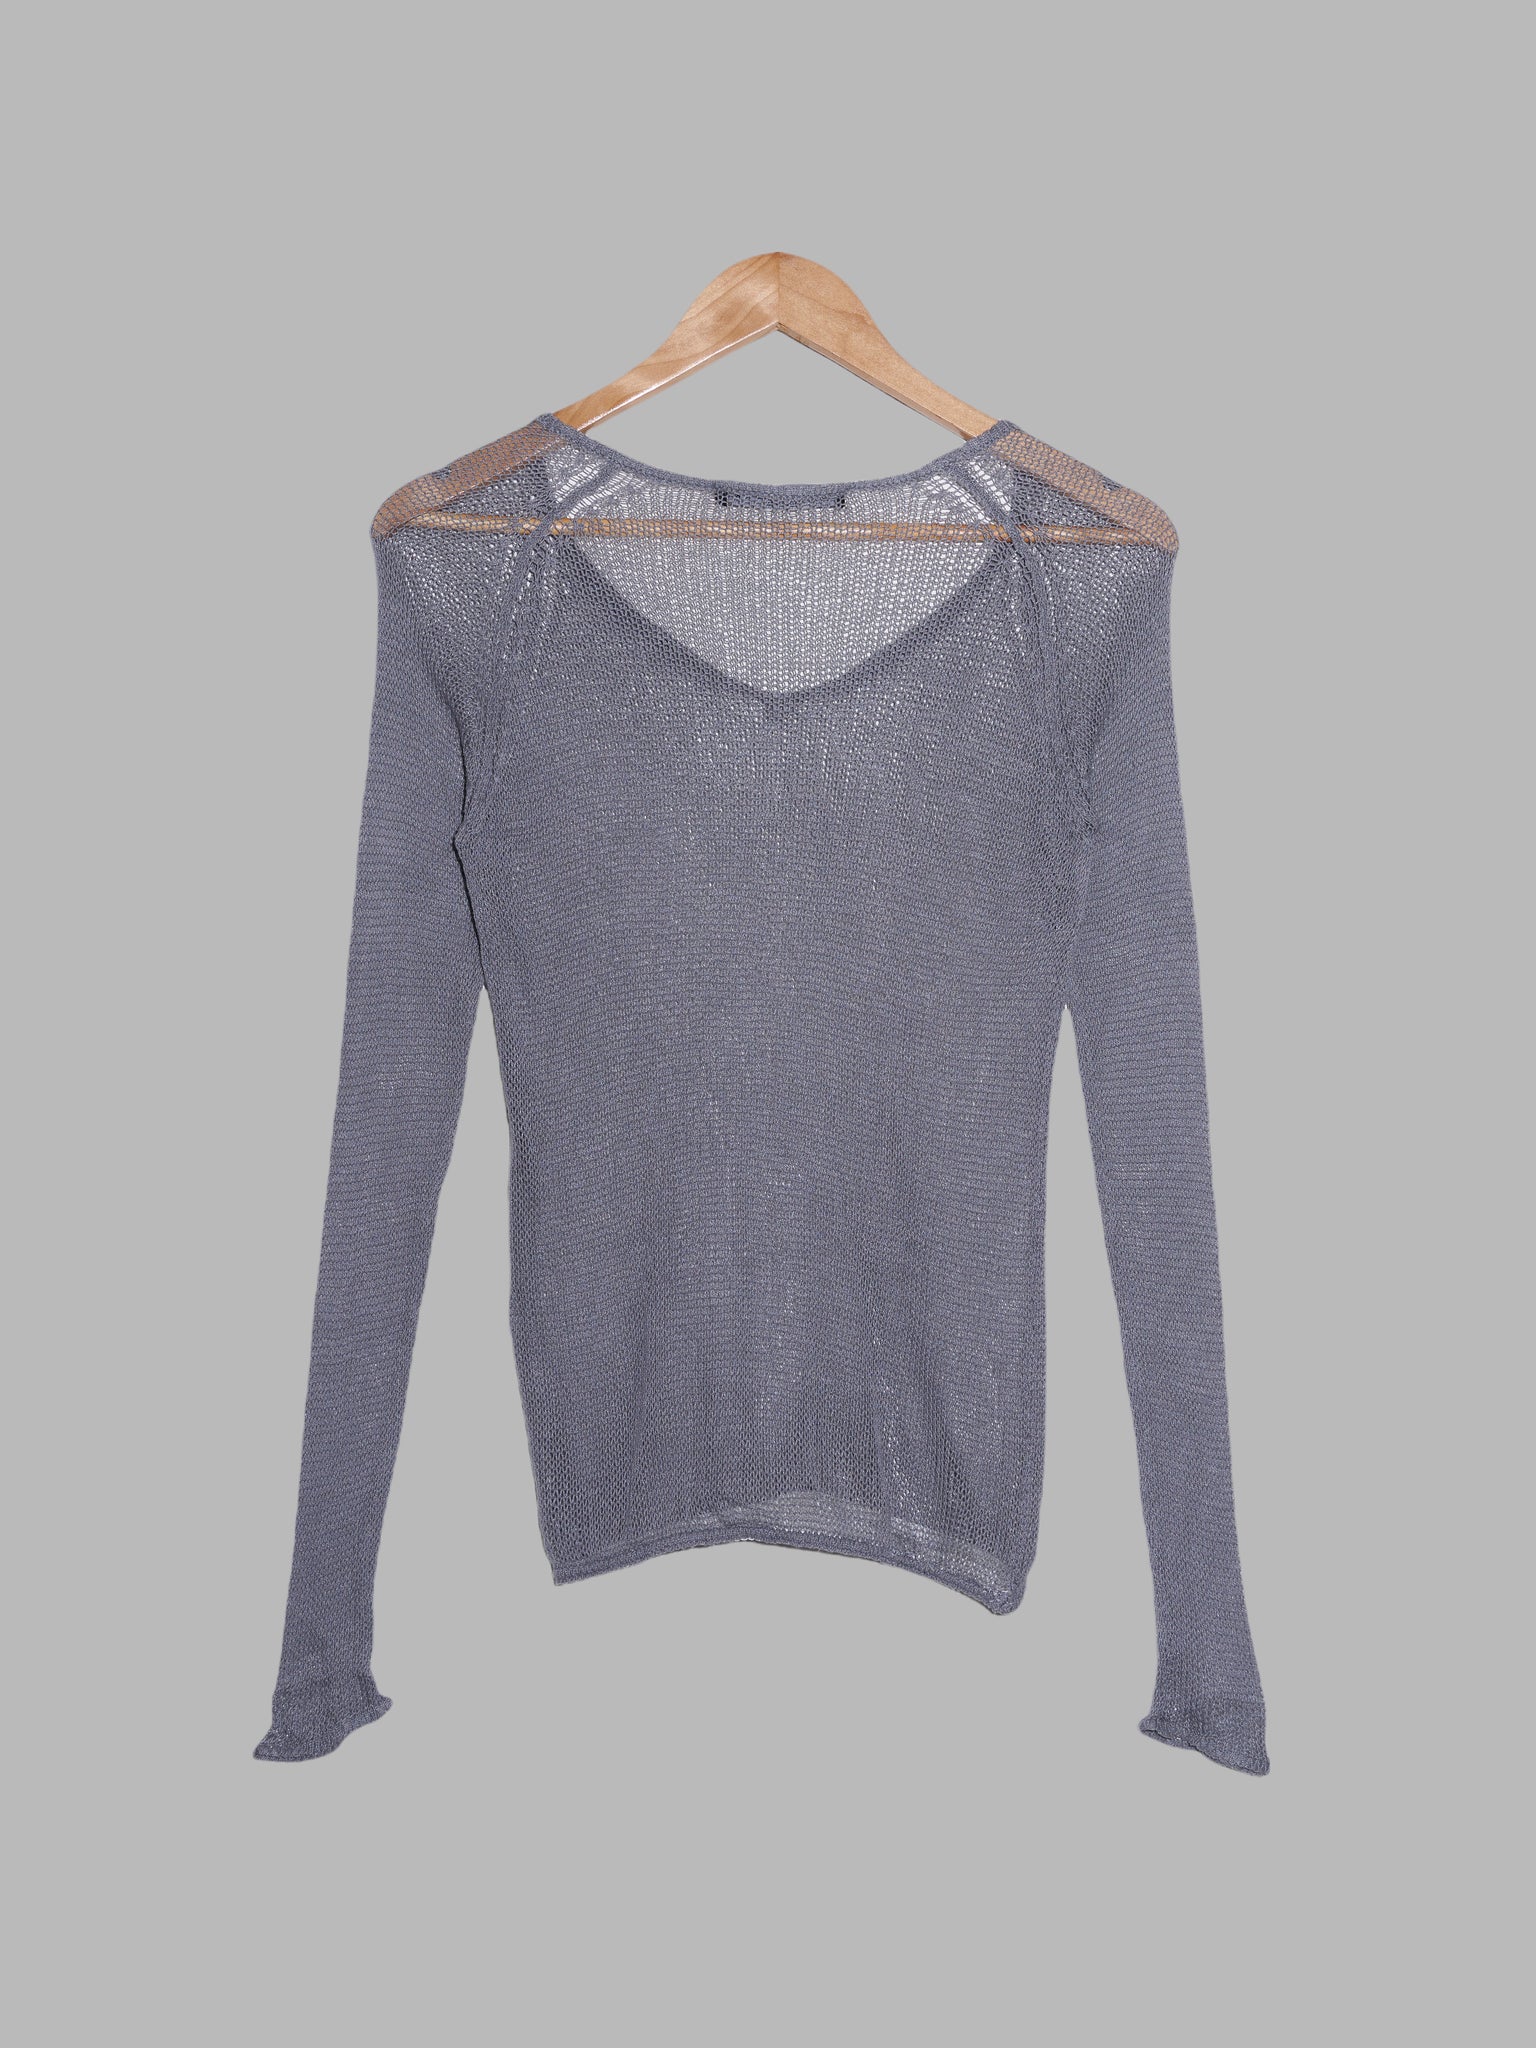 Jean Colonna AW1999 blue-grey silk loose knit long sleeve top - XS